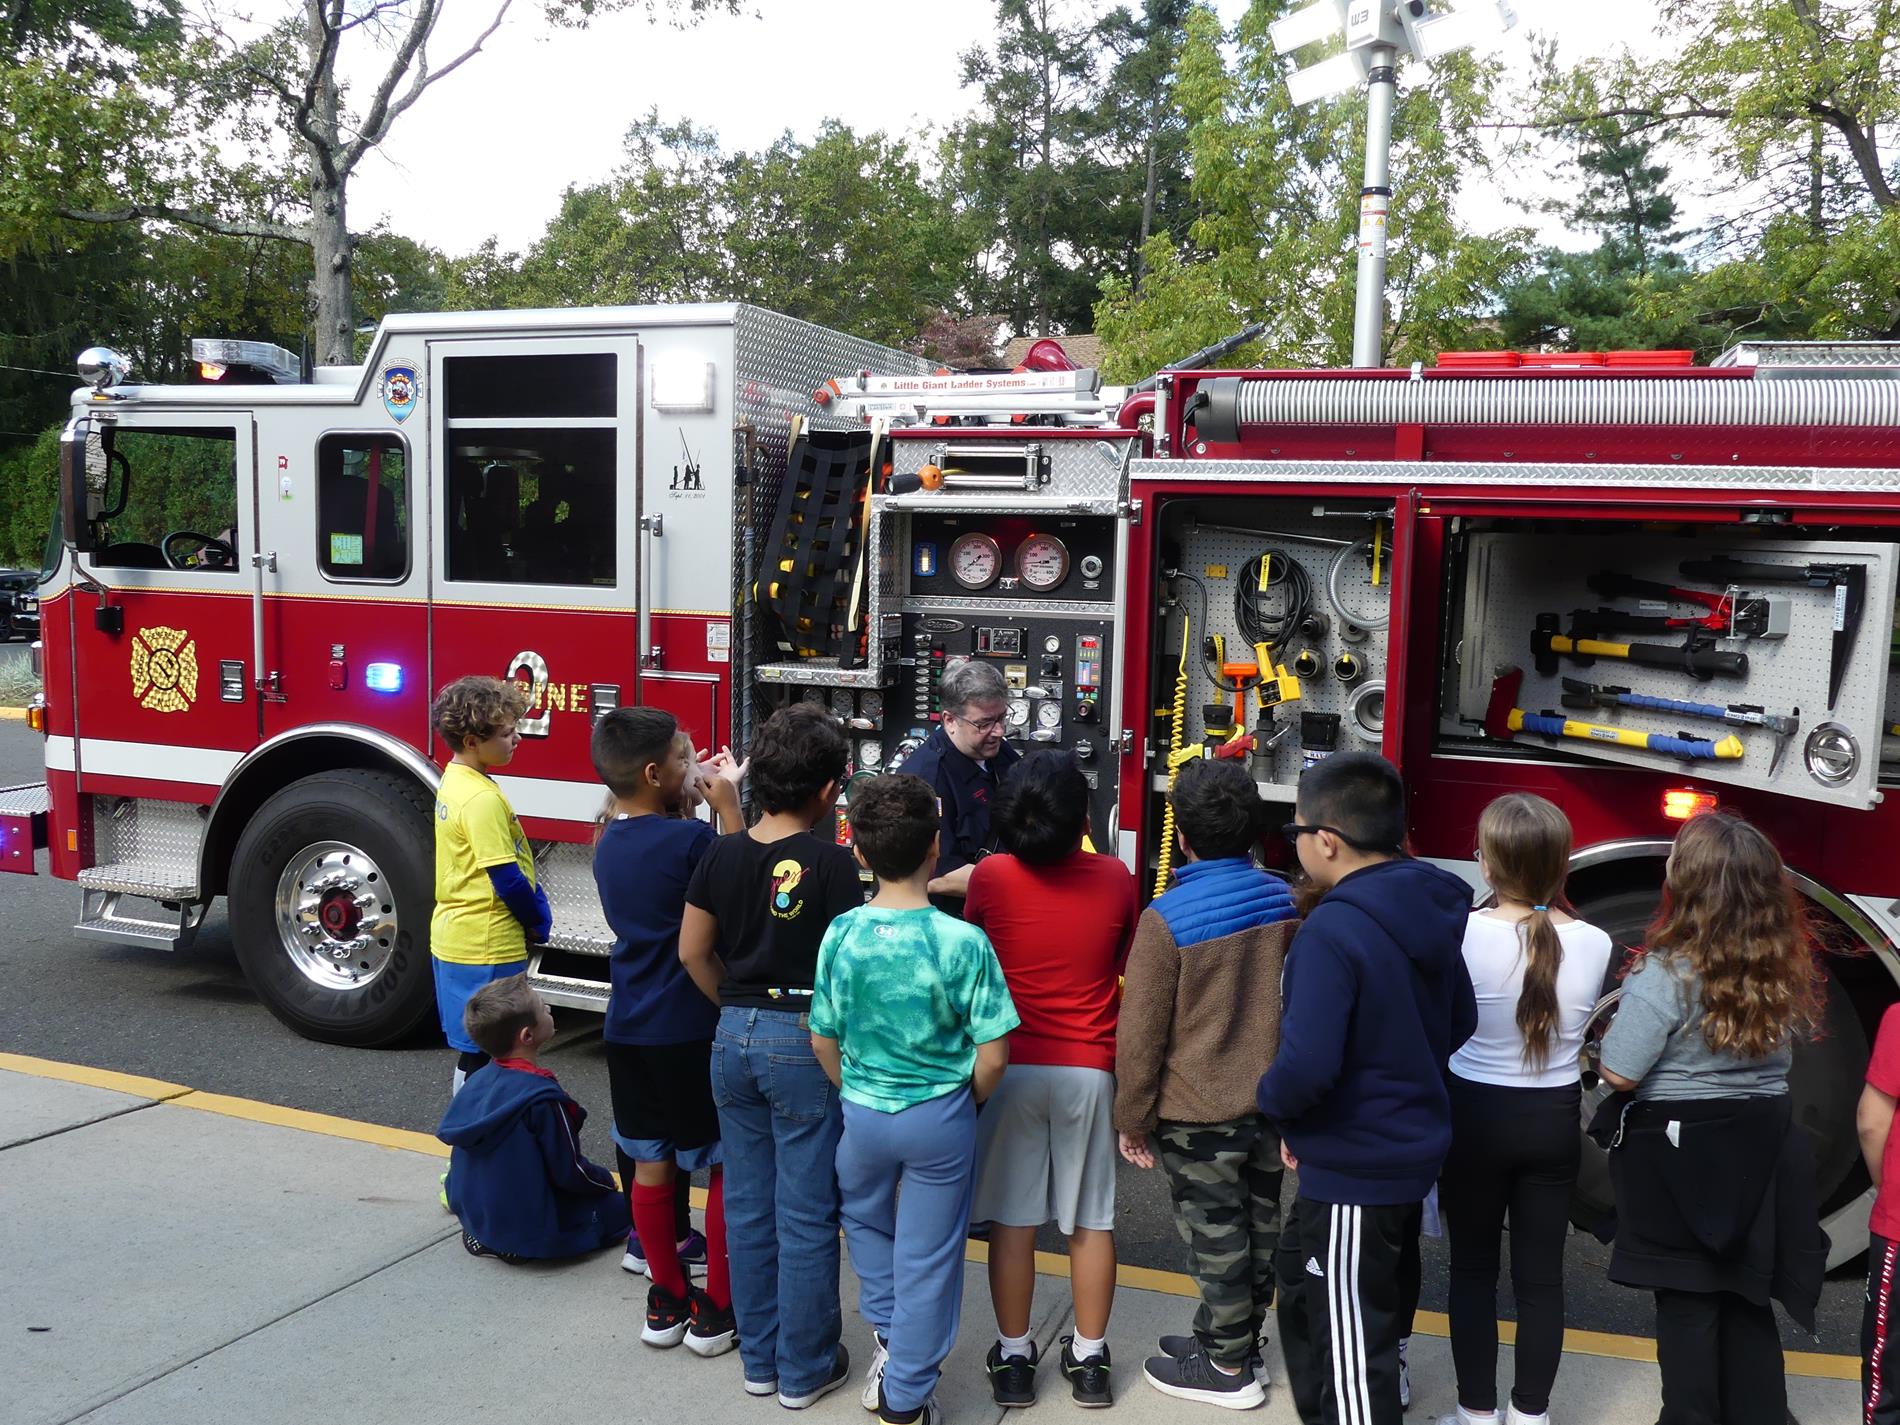 Students learning about fire truck and equipment